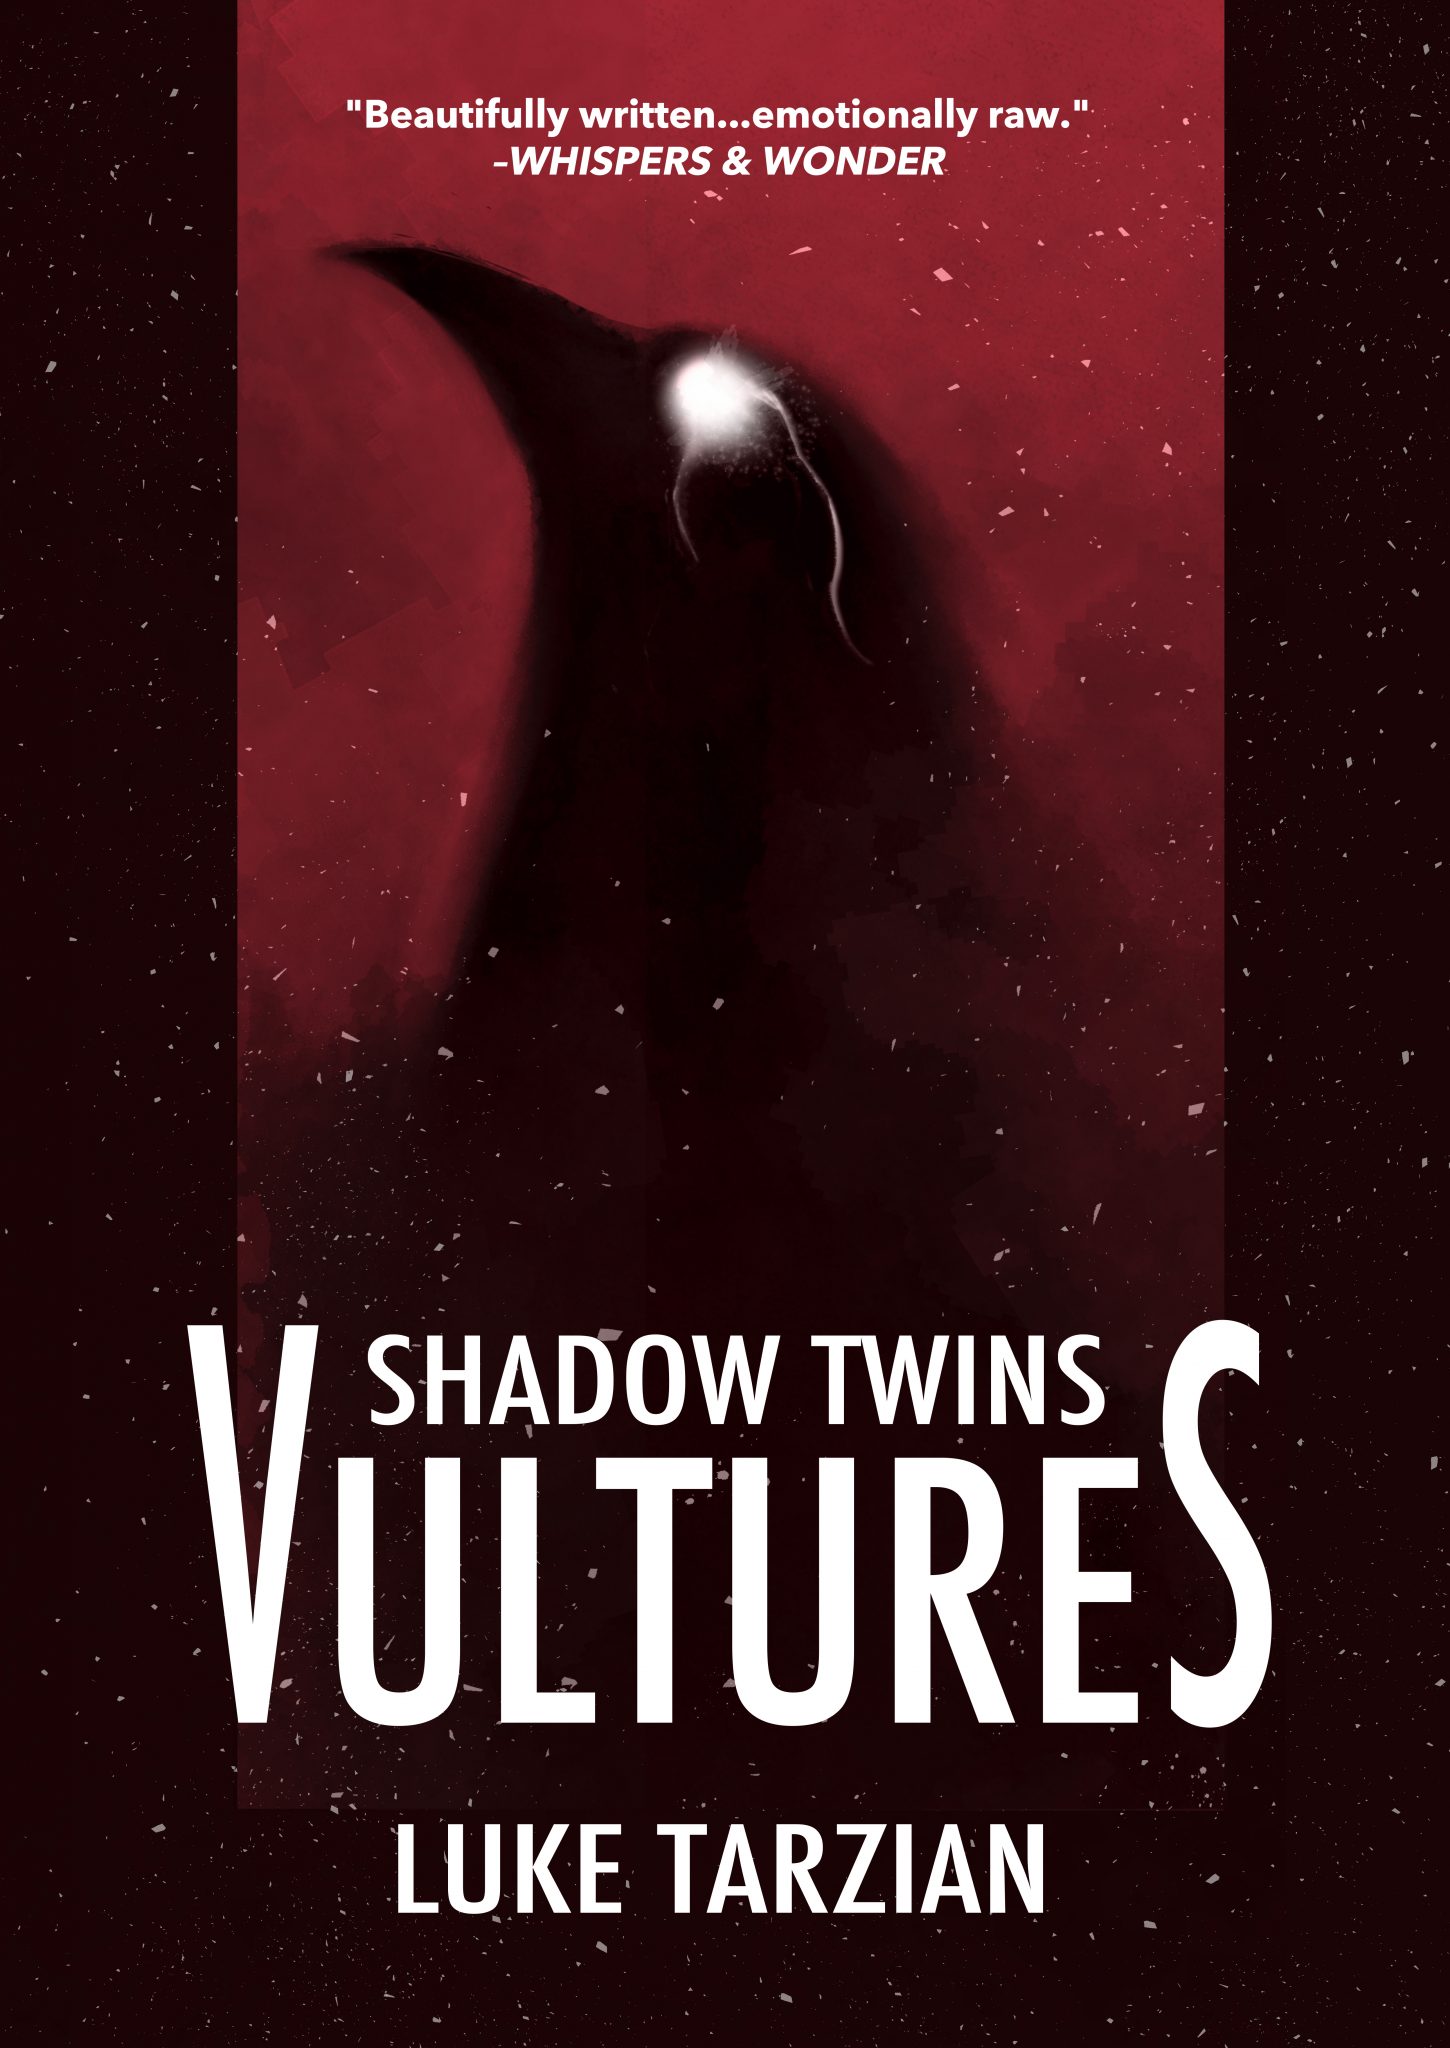 Vultures by Luke Tarzian front cover